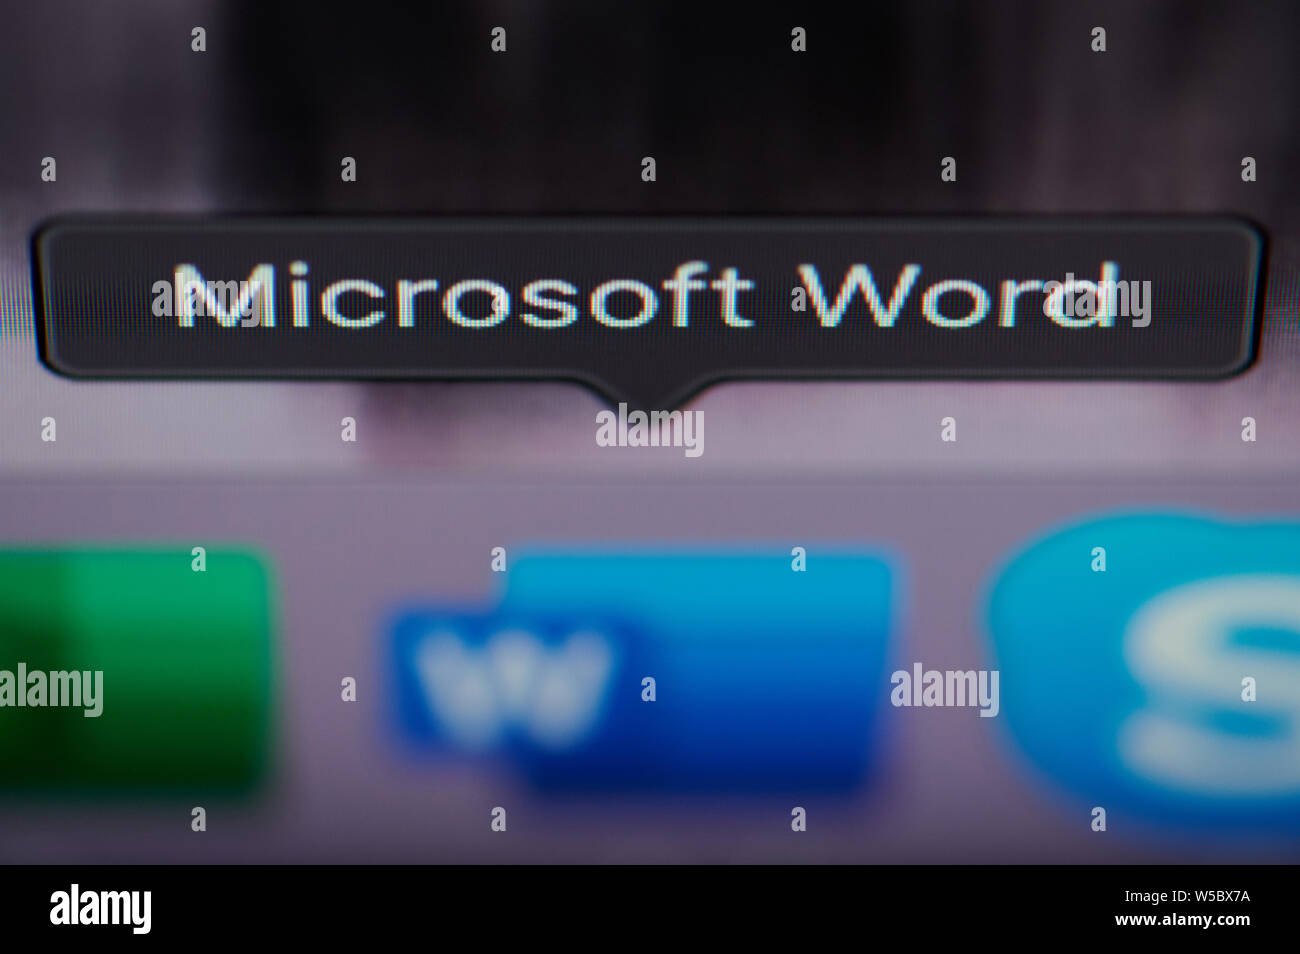 New york, USA - july 26, 2019: Selecting microsoft word application on computer macro close up view in pixel screen Stock Photo